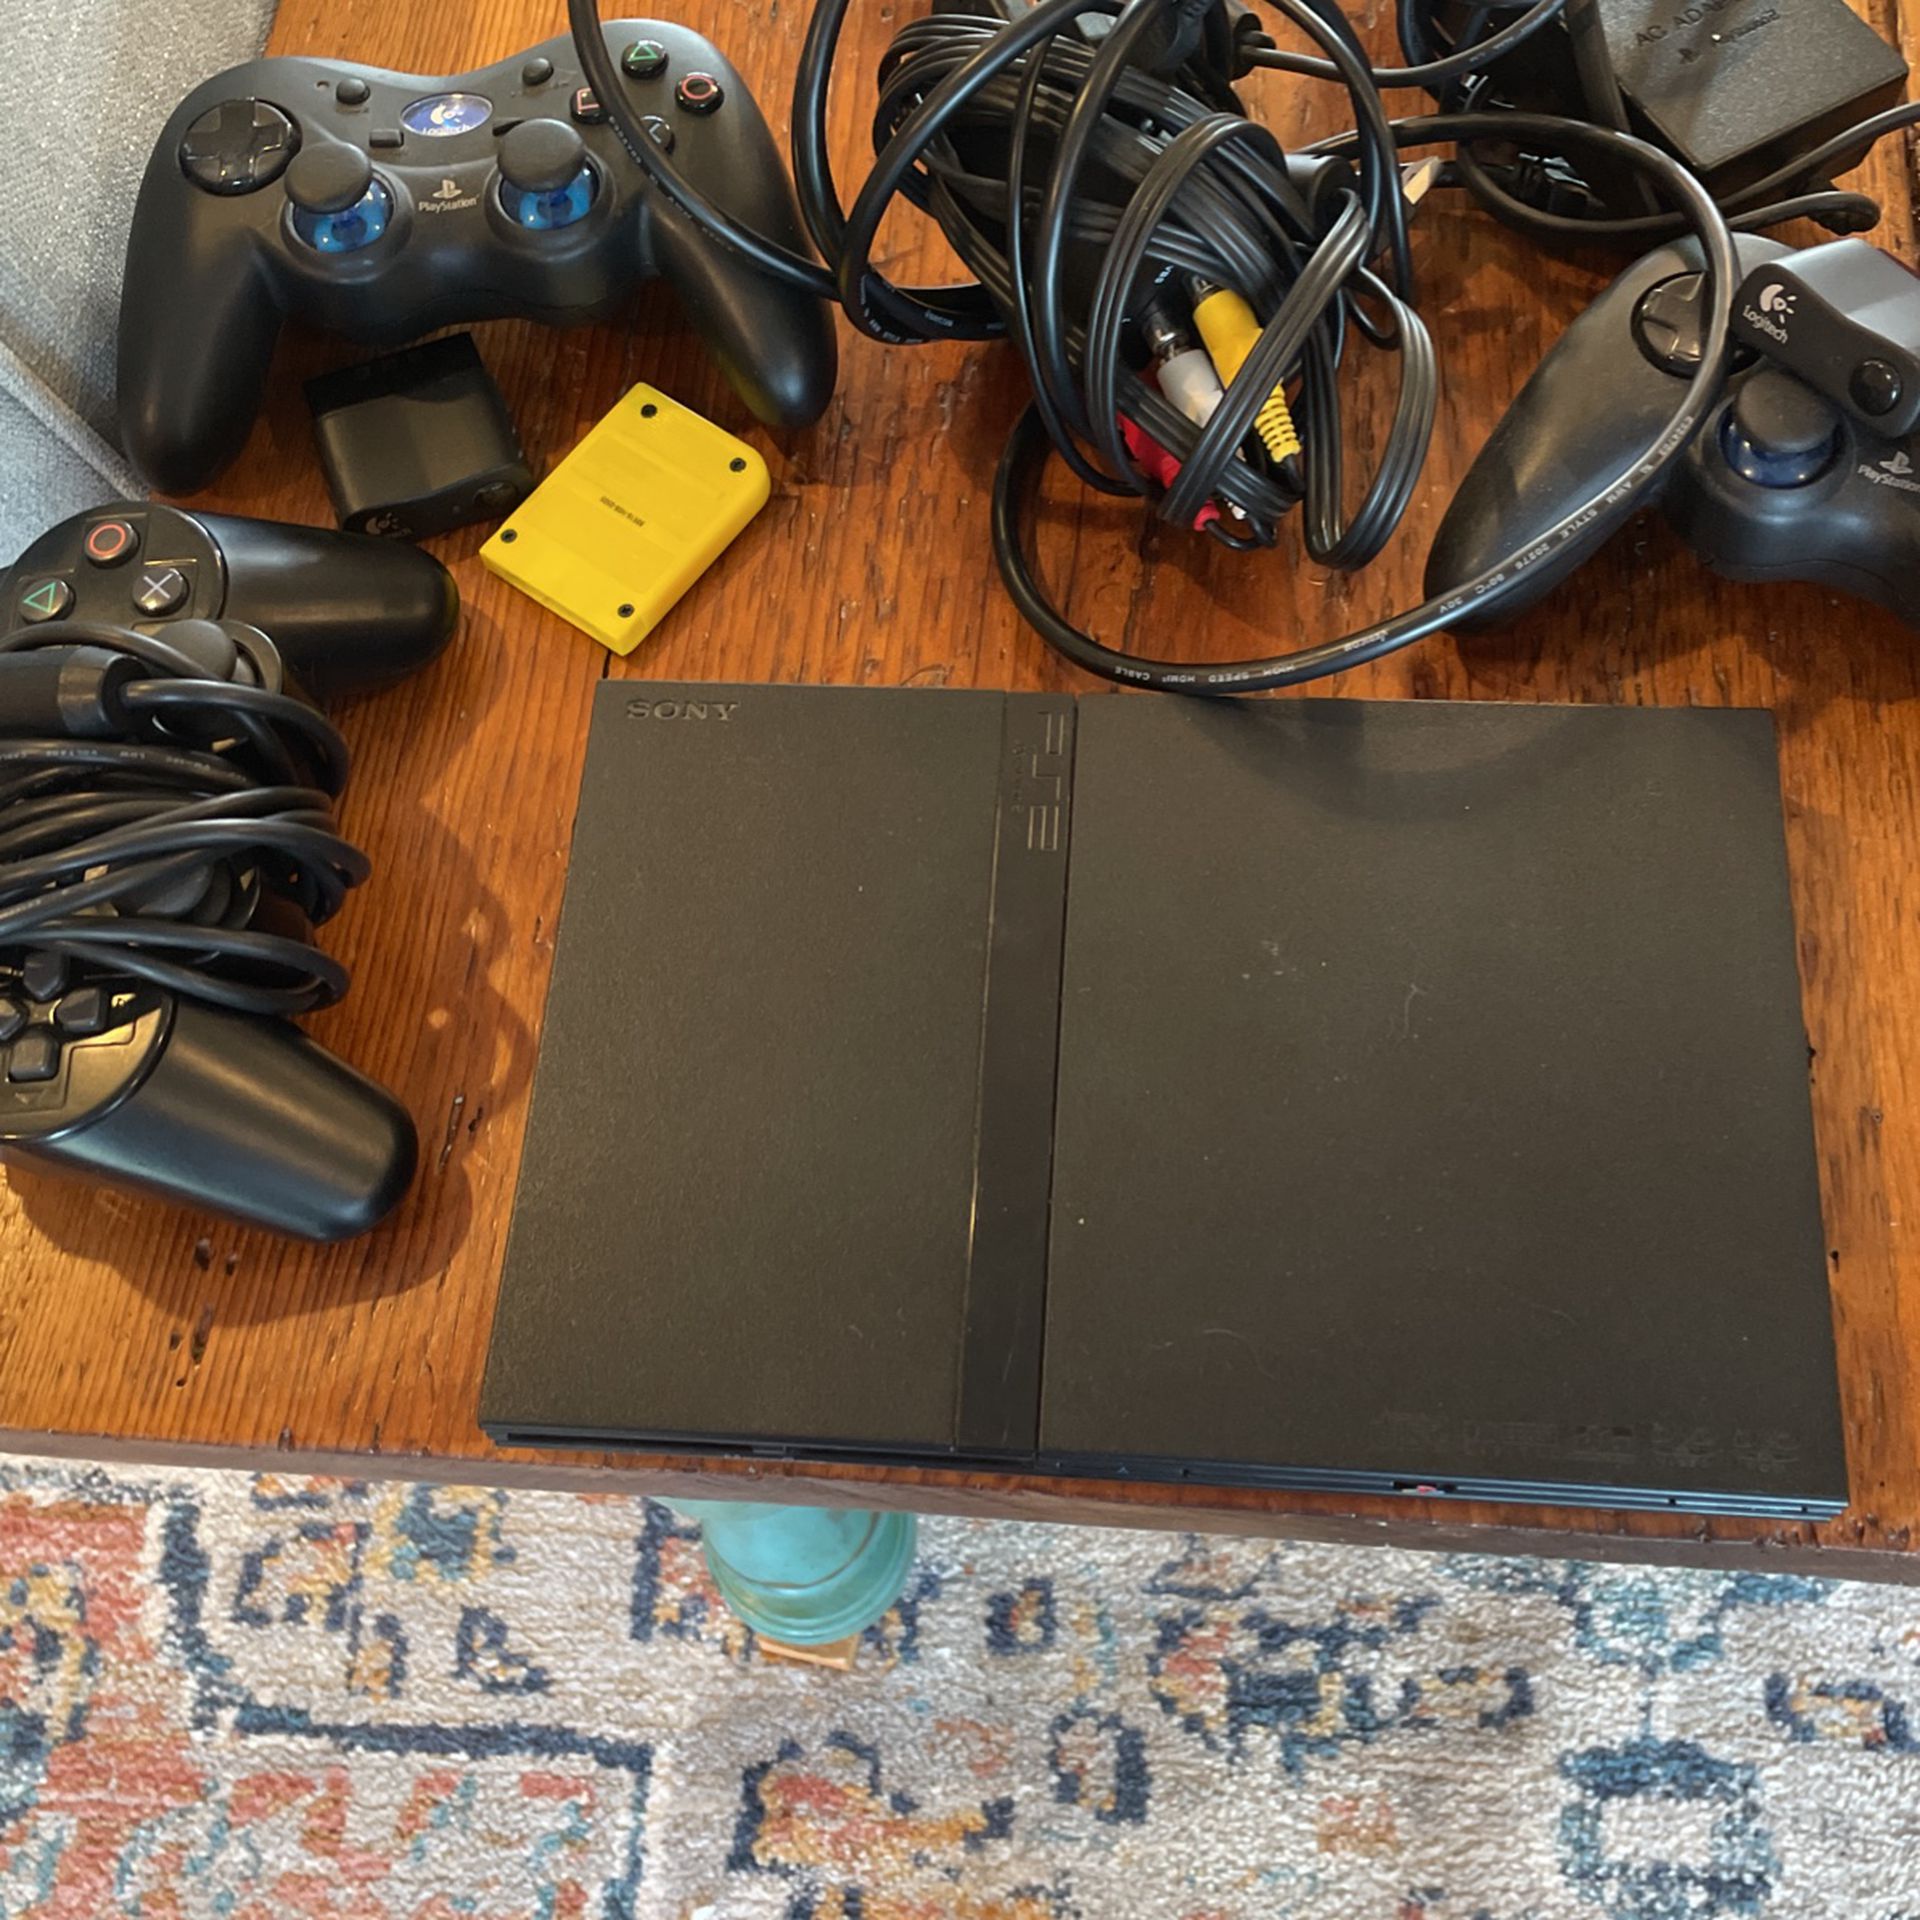 Ps2 Slim With Games